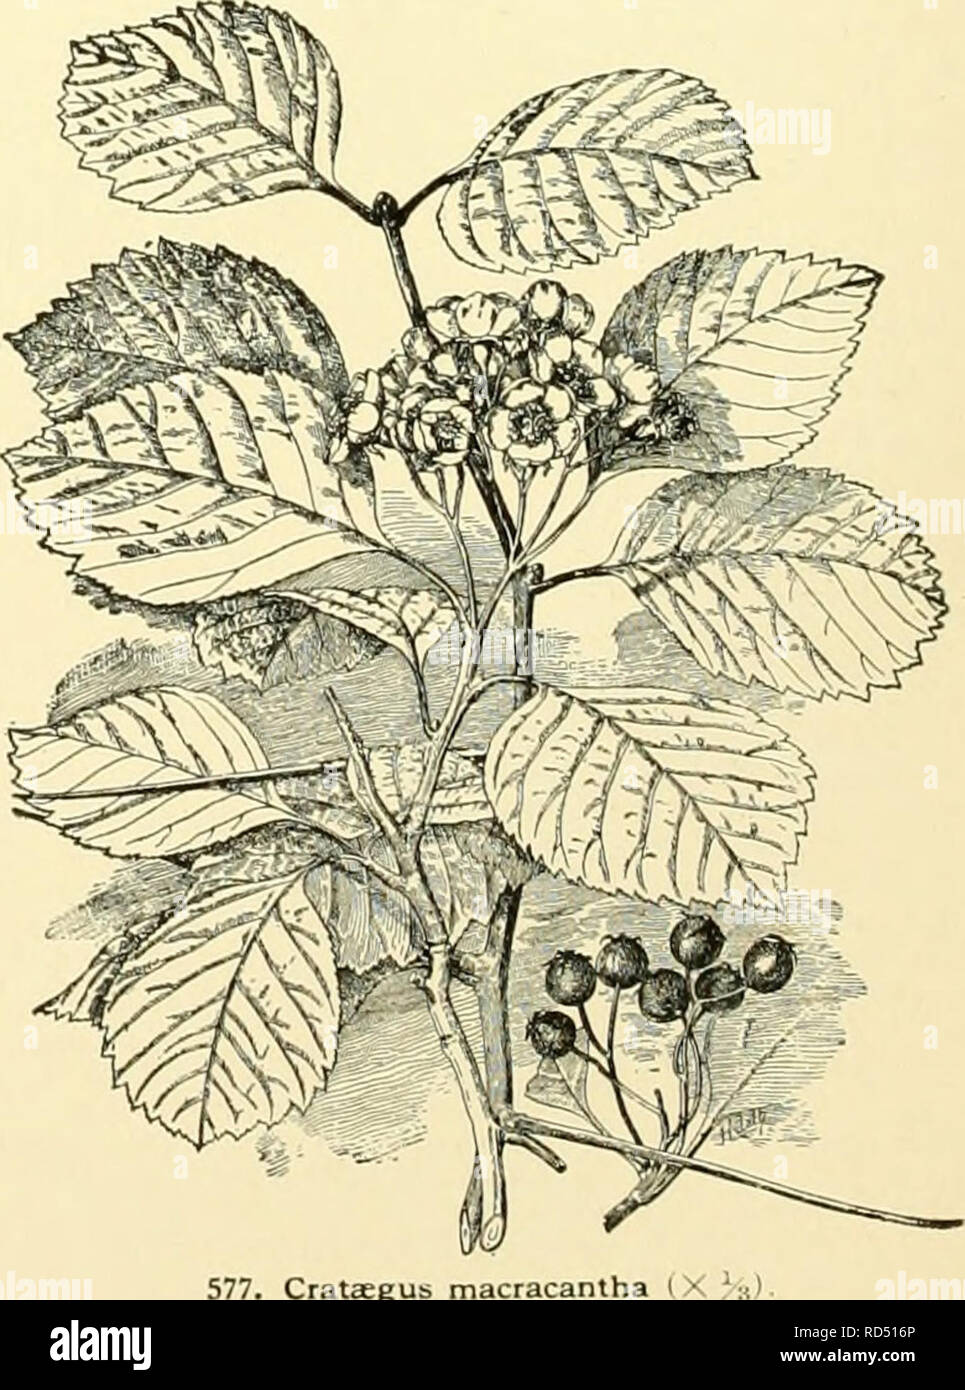 . Cyclopedia of American horticulture, comprising suggestions for cultivation of horticultural plants, descriptions of the species of fruits, vegetables, flowers and ornamental plants sold in the United States and Canada, together with geographical and biographical sketches, and a synopsis of the vegetable kingdom. Gardening -- Dictionaries; Plants -- North America encyclopedias. 576. Crataegus punctata. lous; fls. fragrant; calyx-teeth glandular-serrate: fr. H in. in diam. May, June. Quebec to Va.. west to Mo. and Dak. S.S.4:181. B.R. 22:1912. L.B.C. 11:1012 (as C. glandulosa). A.G. ll:509.-S Stock Photo